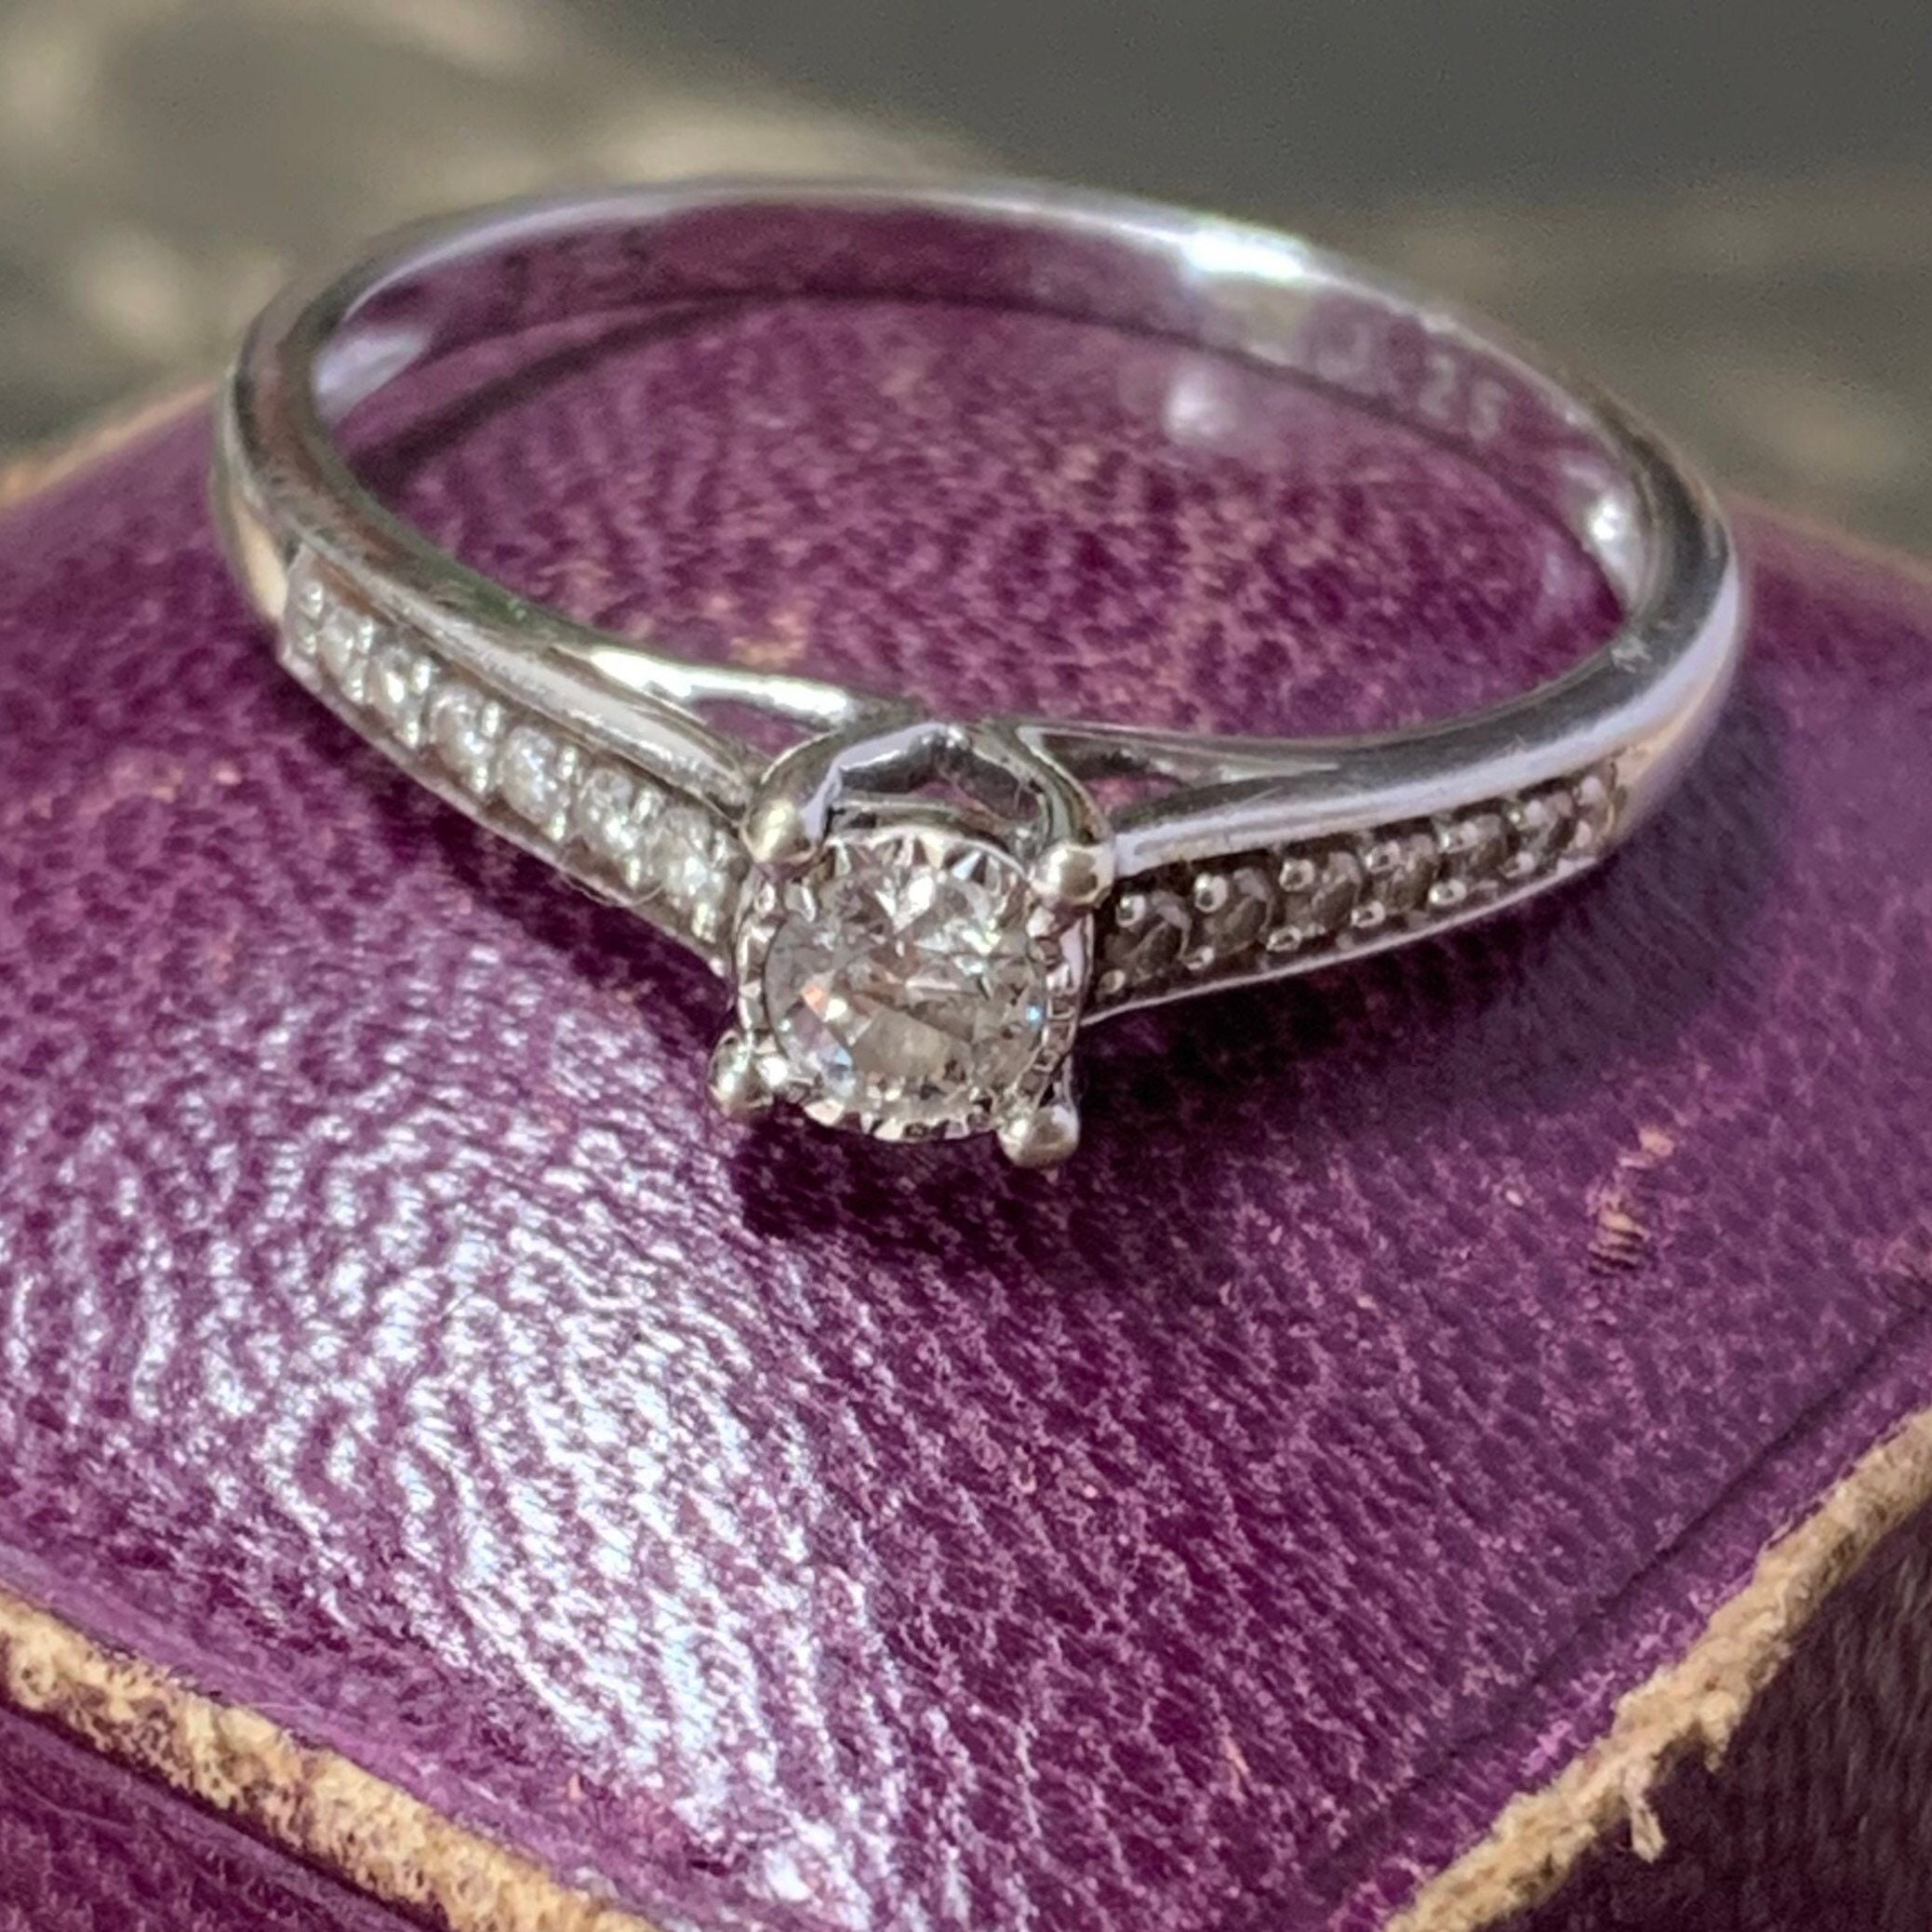 A Stunning Diamond Engagement Ring With A 13 Round Cut Gemstones That Look Amazing Lots Of Sparkle. Full English Hallmarks